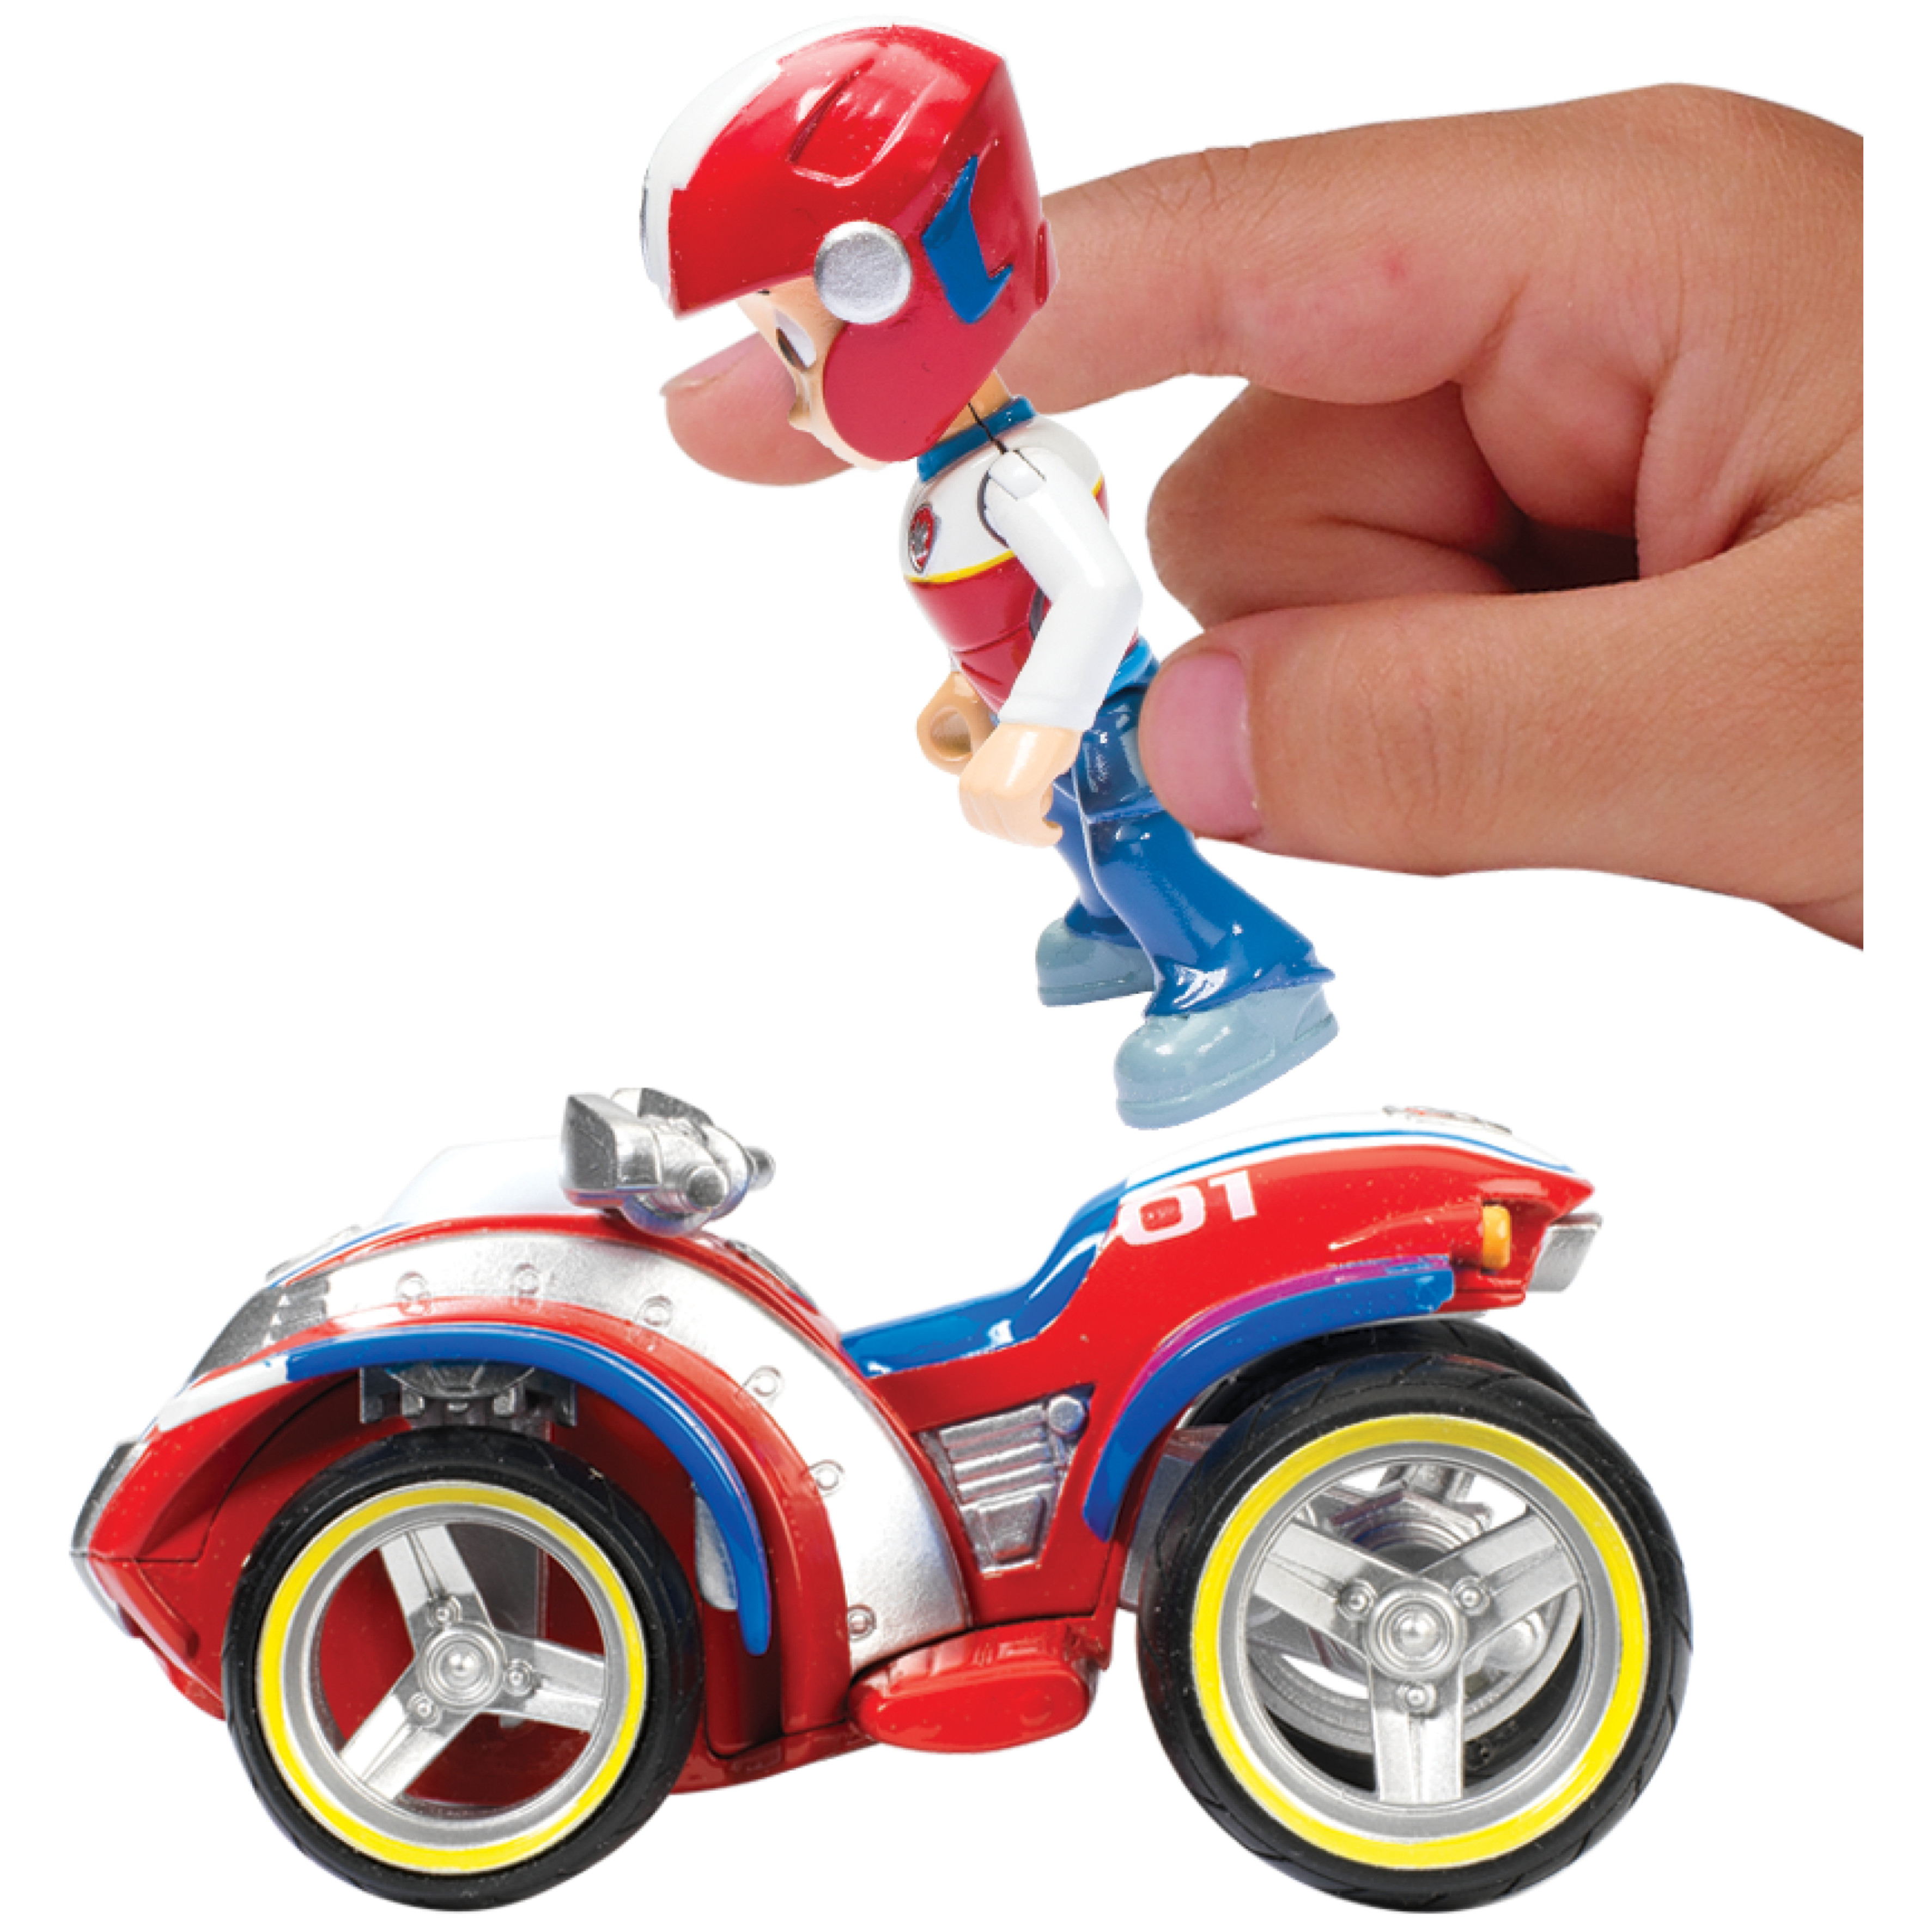 PAW Patrol Ryder's Rescue ATV, Vehicle and Figure, For Ages 3 and up - image 2 of 6